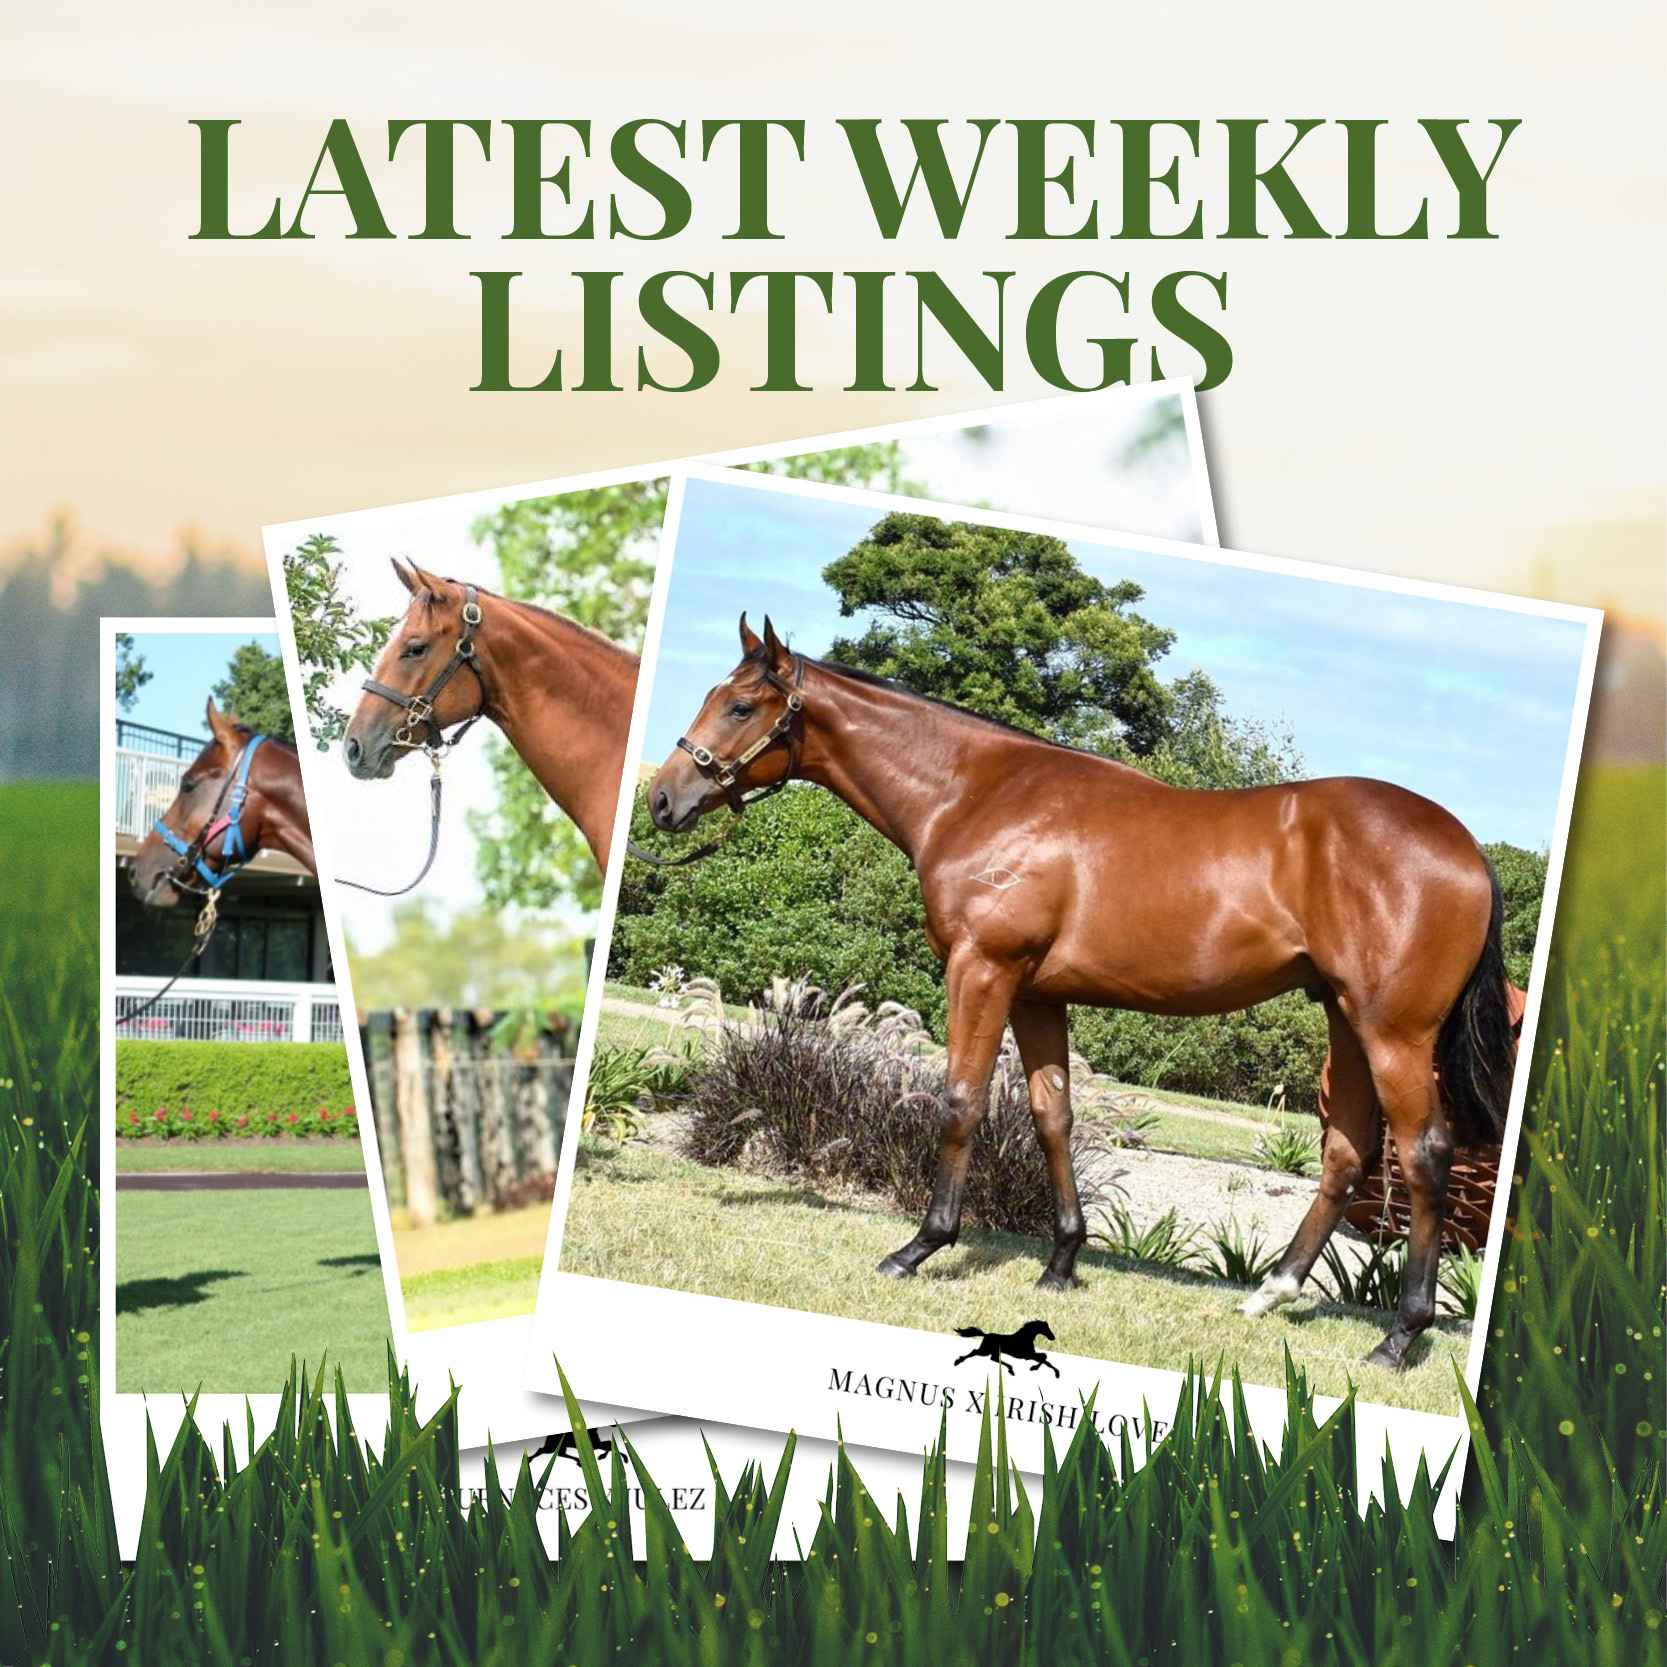 Latest Weekly Listings – Furnaces, Winning Rupert and Magnus